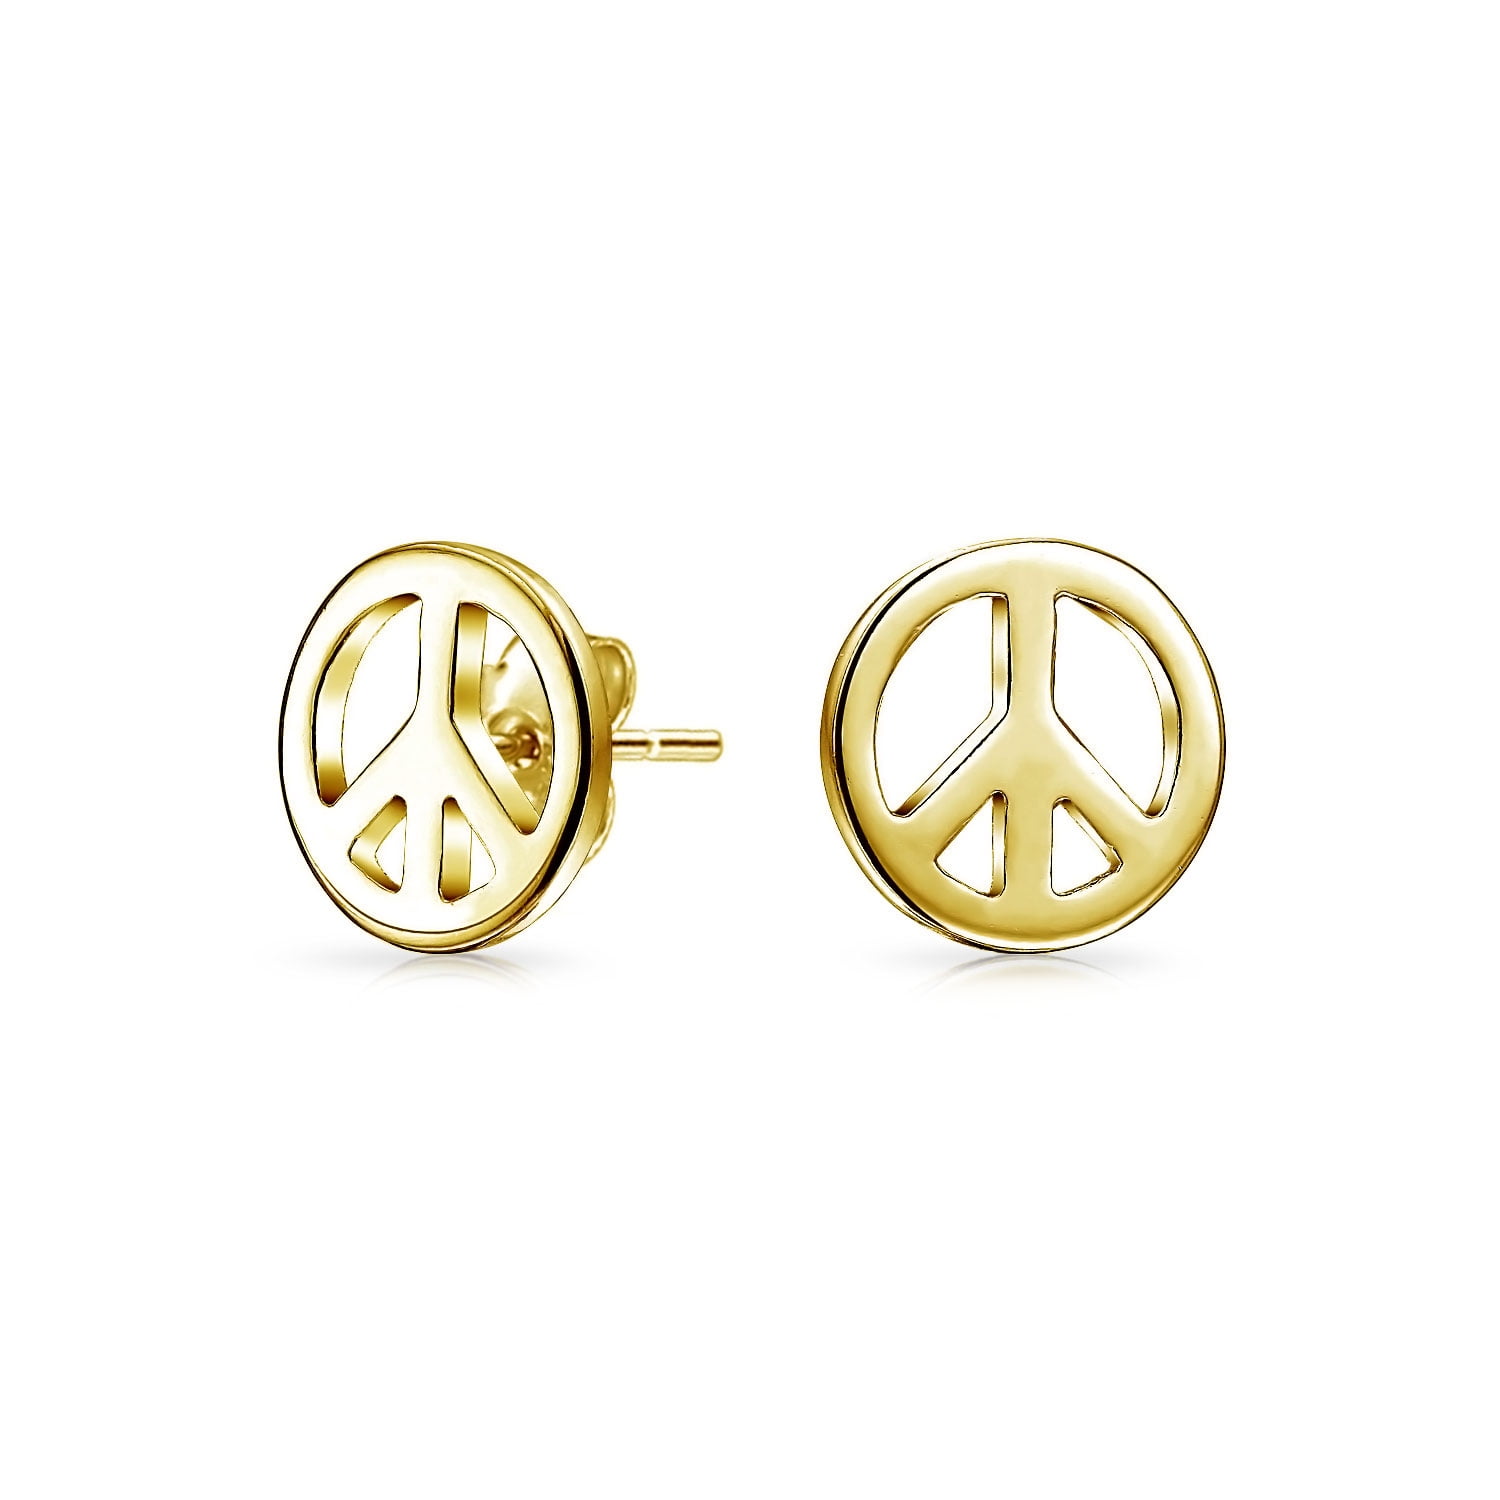 14K Solid Gold Peace Sign Dangle Earrings